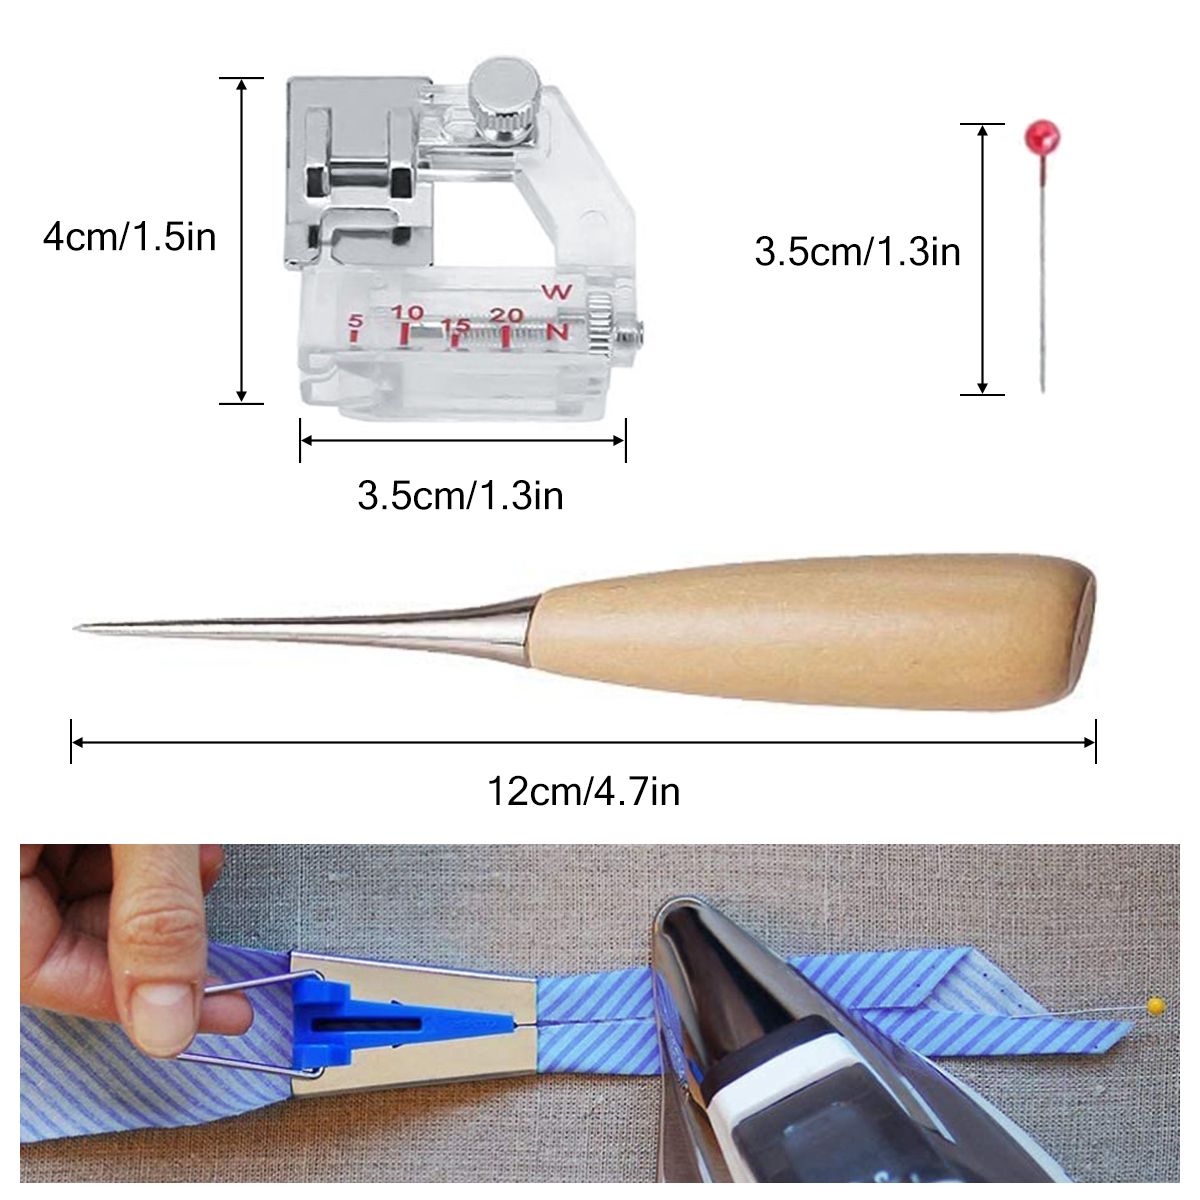 Sewing-Tape-Maker-Kits-4-Sizes-6MM-12MM-18MM-25MM-Household-DIY-Fabric-Patchwork-Sewing-Accessories--1707094